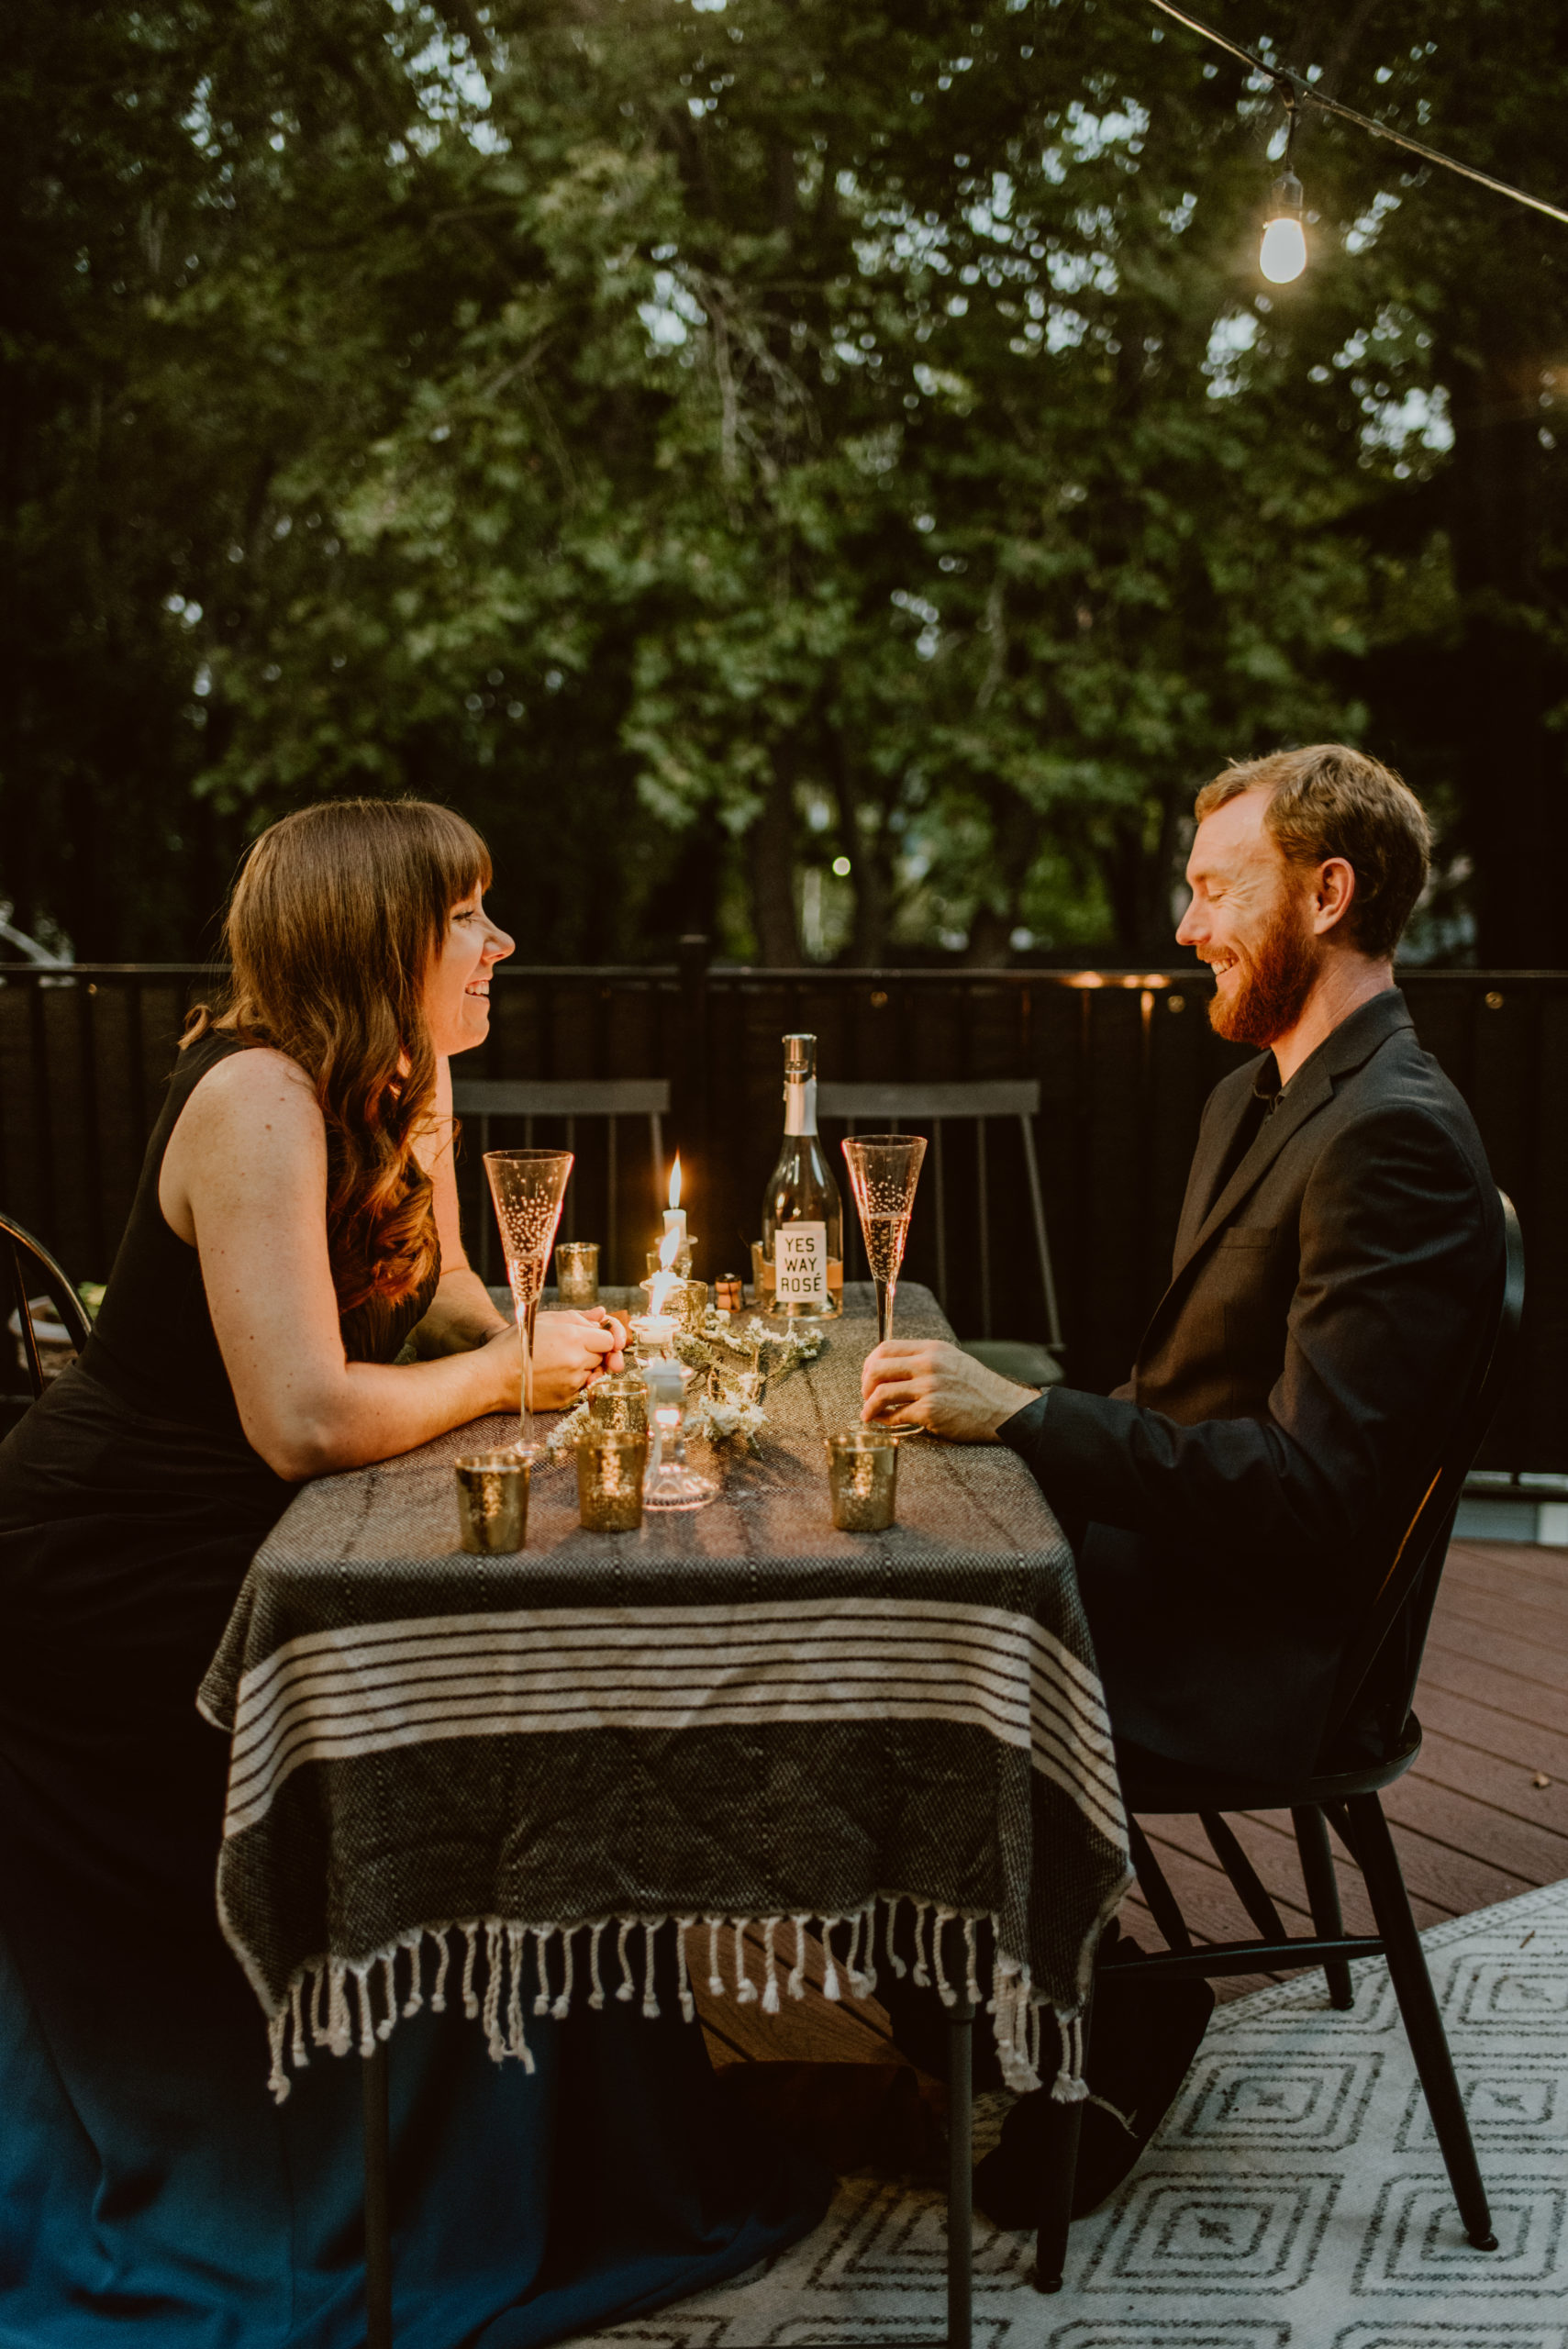 A couple in formal wear sit across from each other at a table outside under a canopy of trees. Read this post for an elegant and easy way to celebrate your original wedding date.